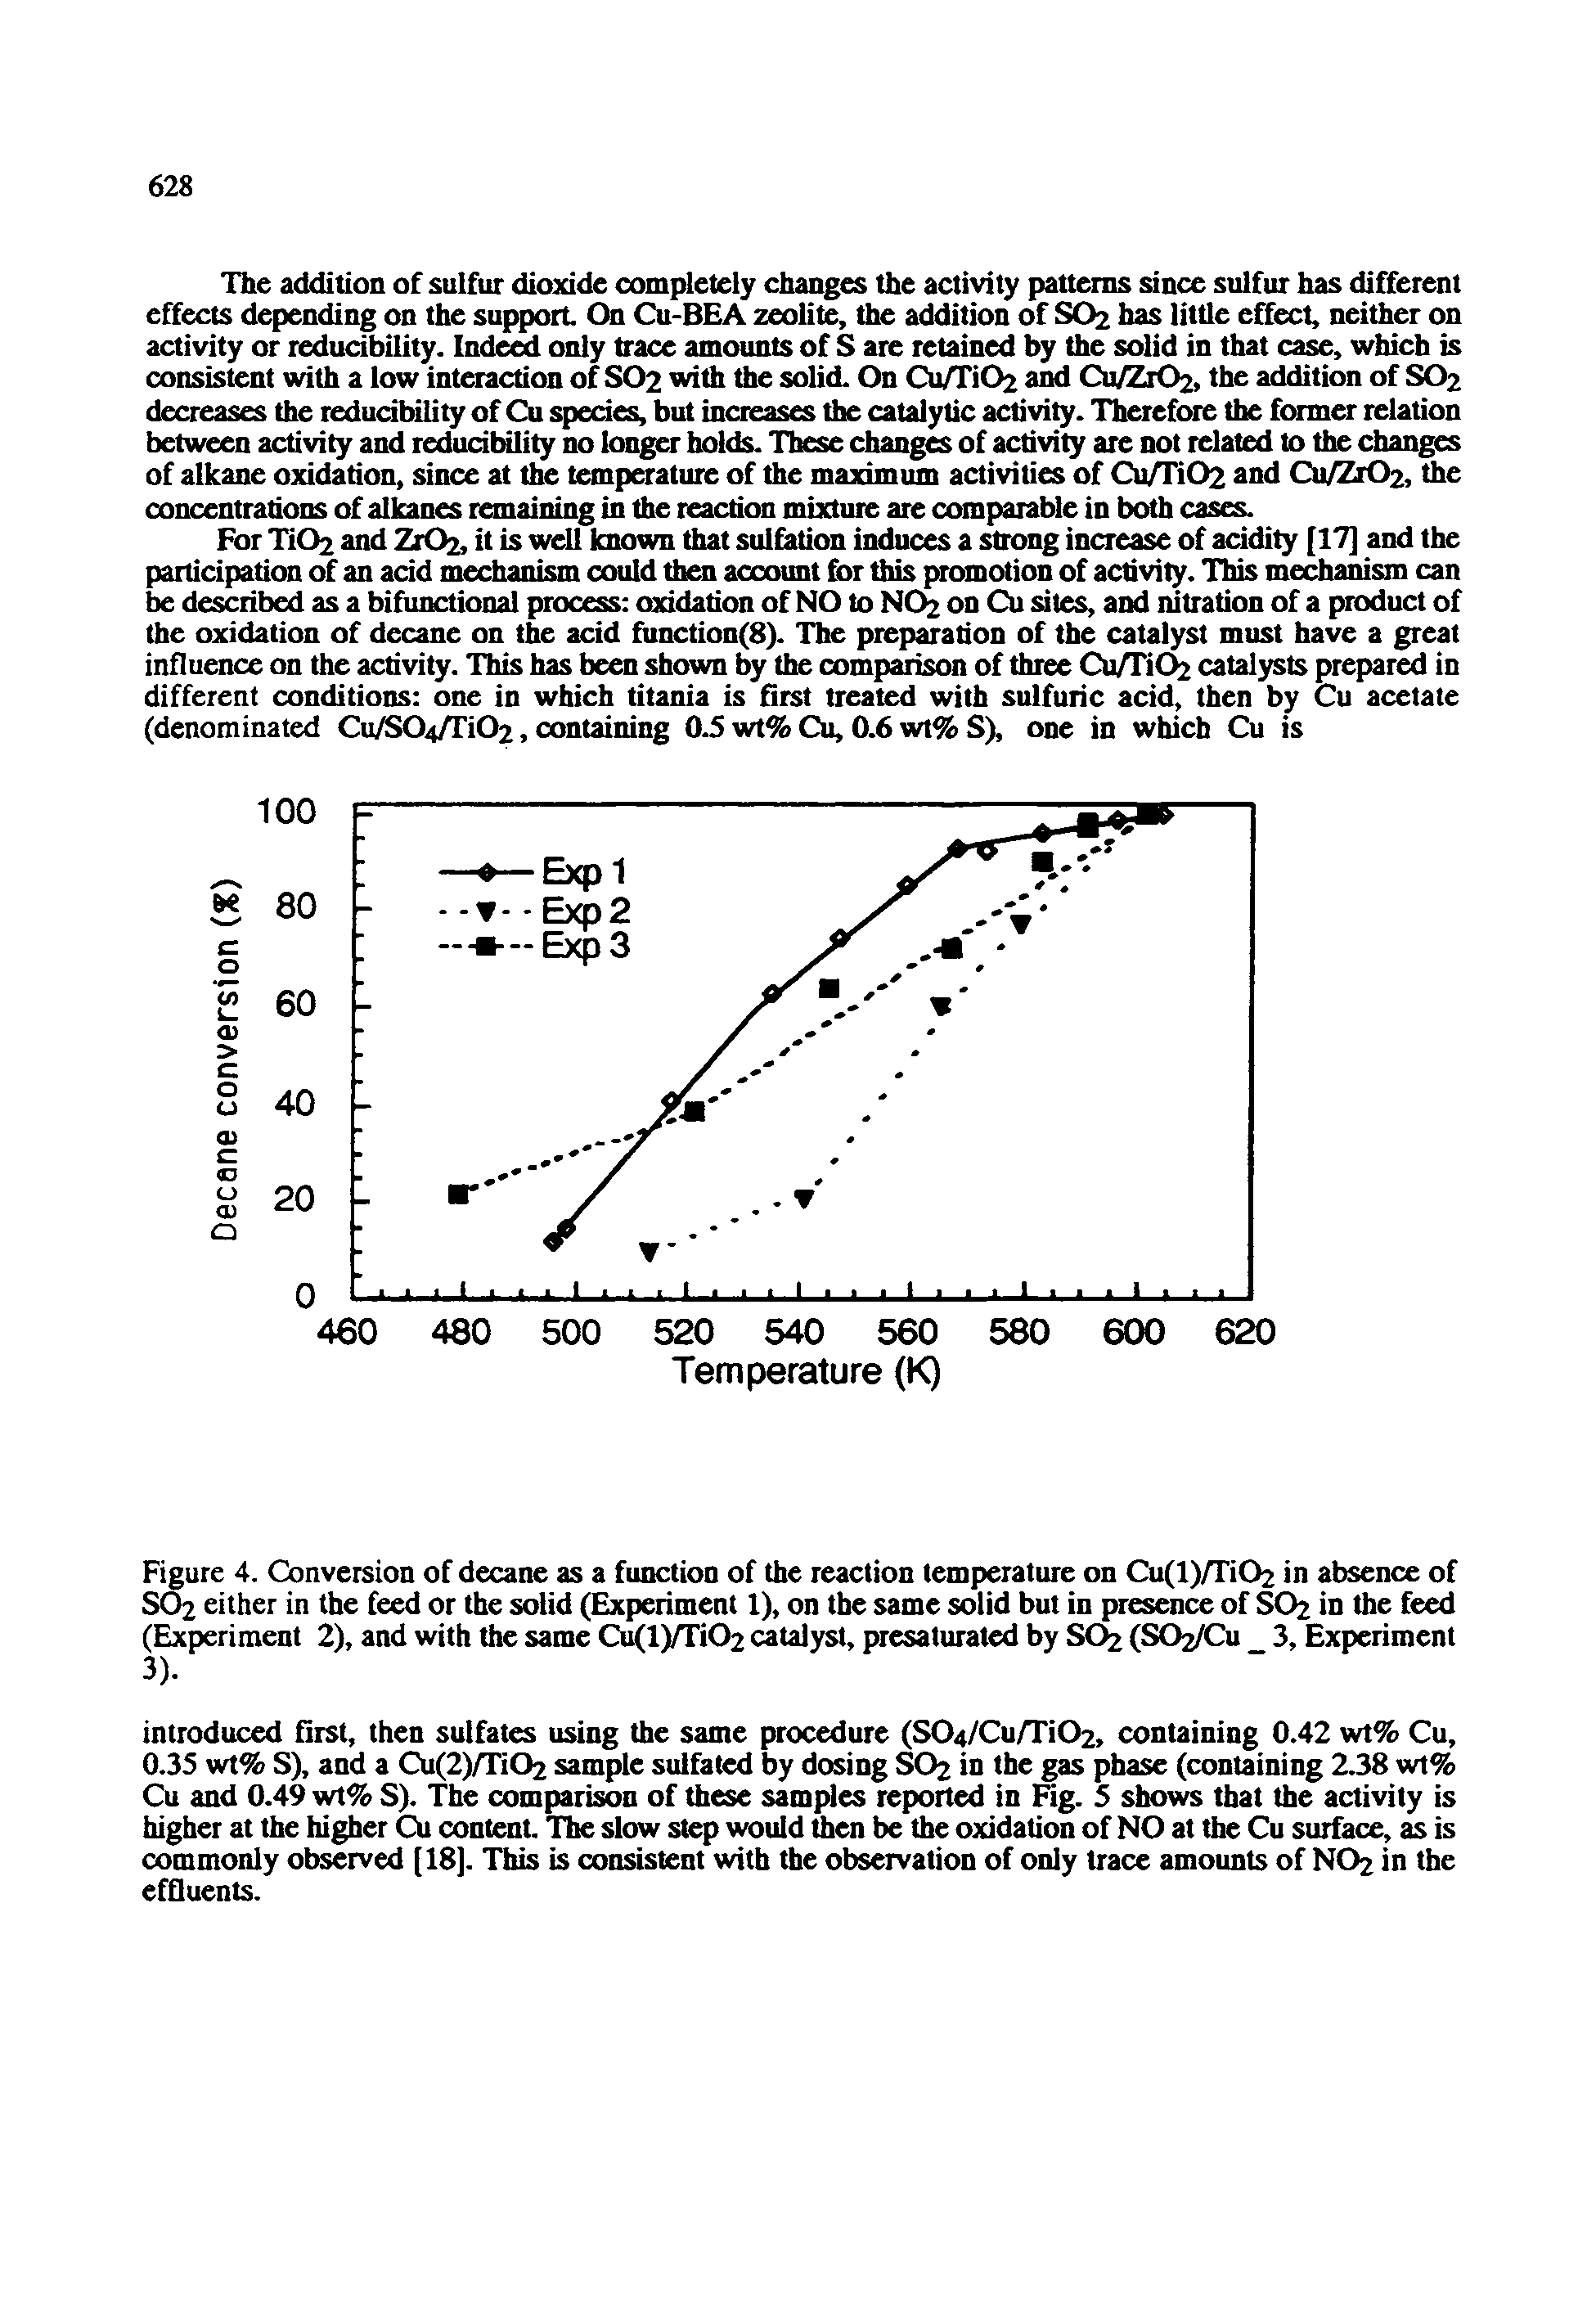 Figure 4. Conversion of decane as a function of the reaction temperature on Cu(l)/TiC>2 in absence of 80 2 either in the feed or the solid (Experiment 1), on the same solid but in presence of SO2 in the feed (Experiment 2), and with the same Cu(l)/Ti02 catalyst, presaturated by SC (SO2/CU 3, Experiment...